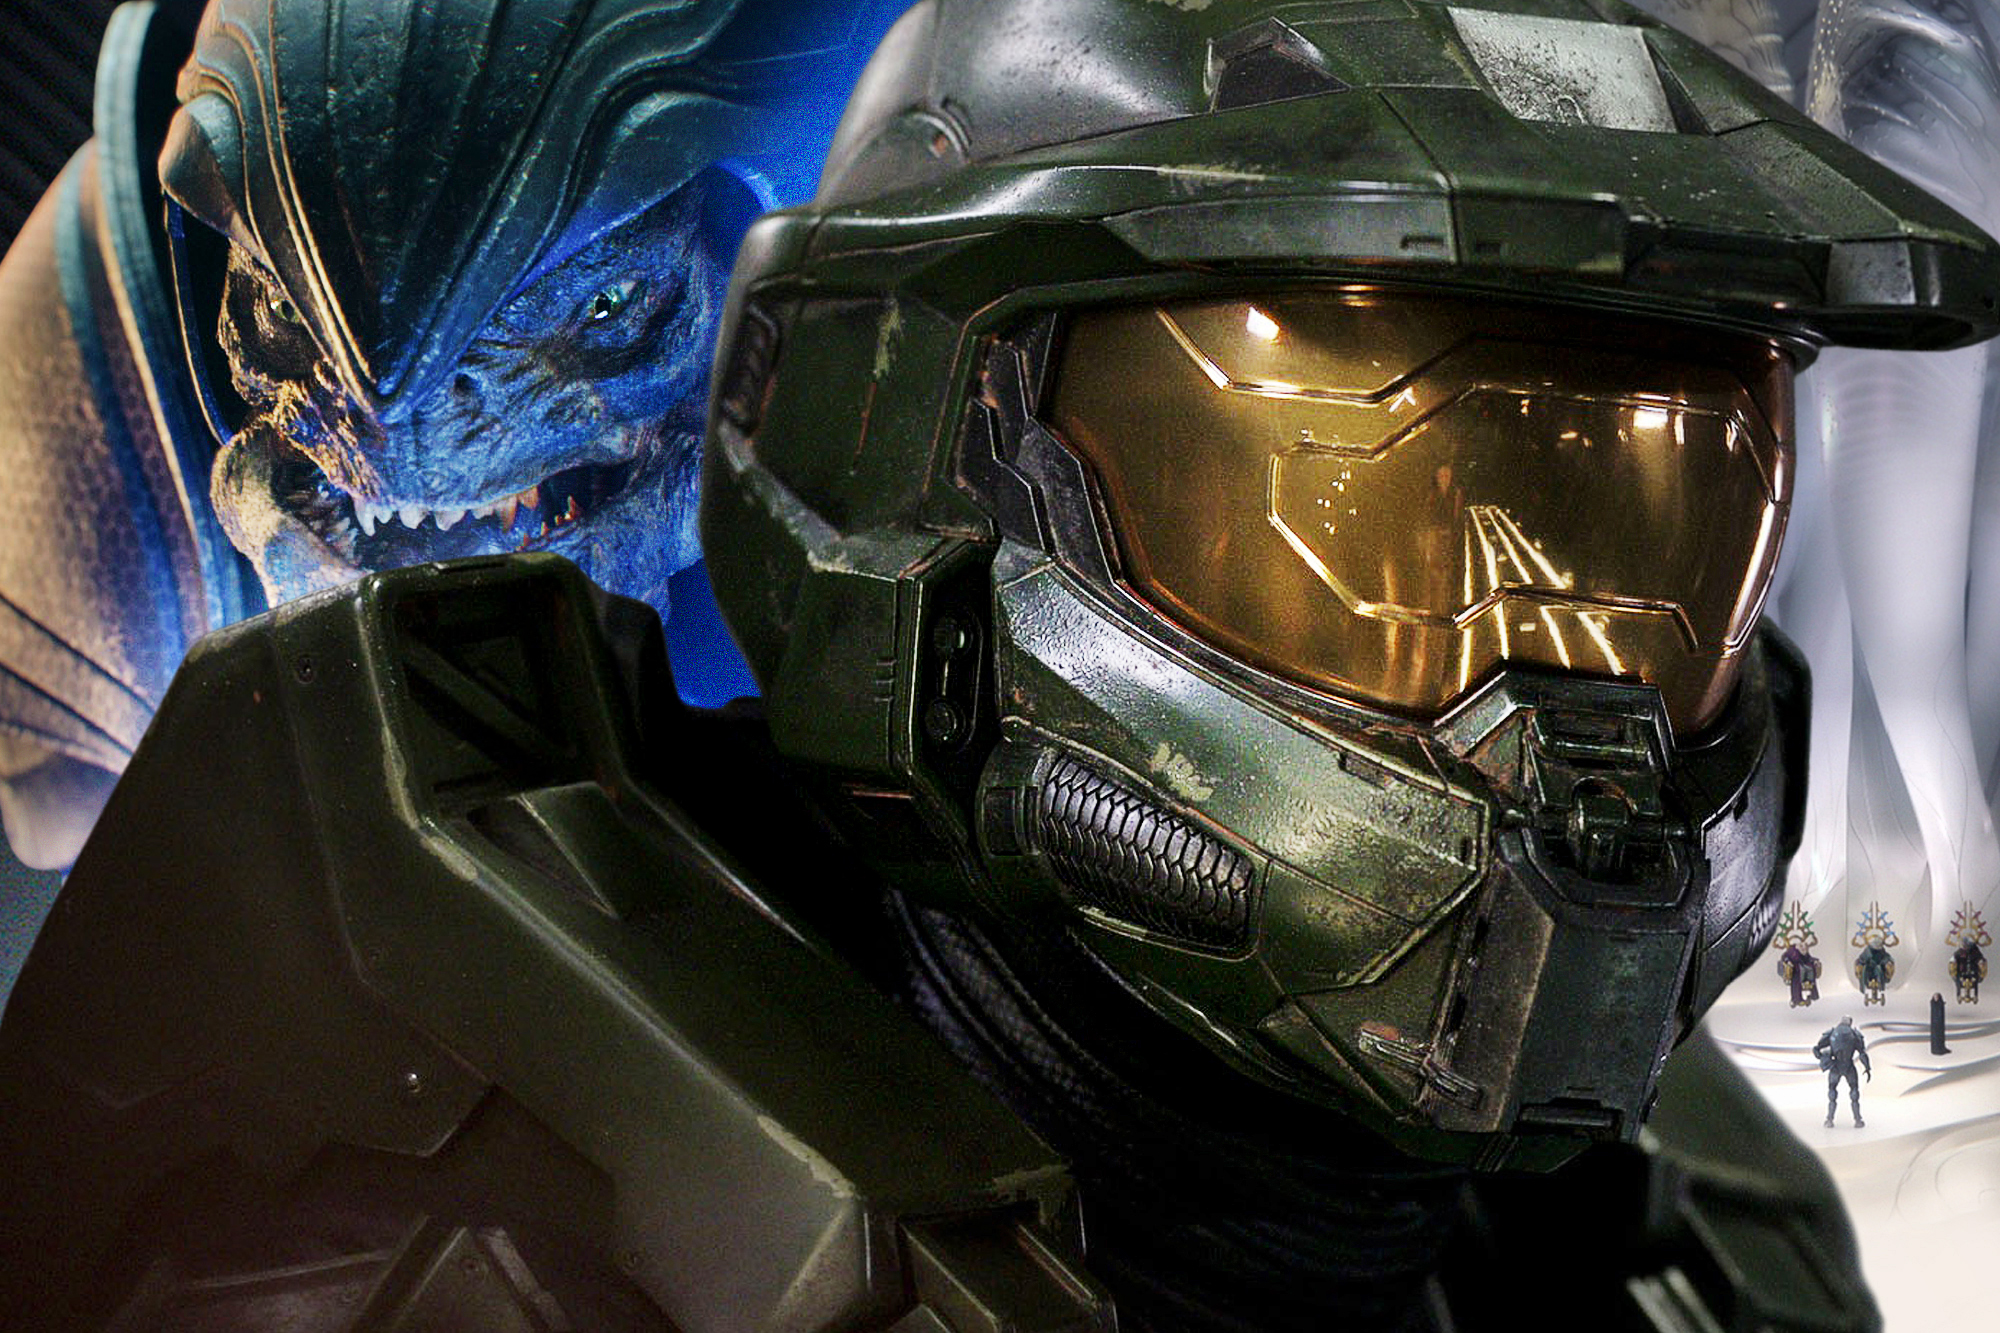 Photo collage of images from the Halo TV show